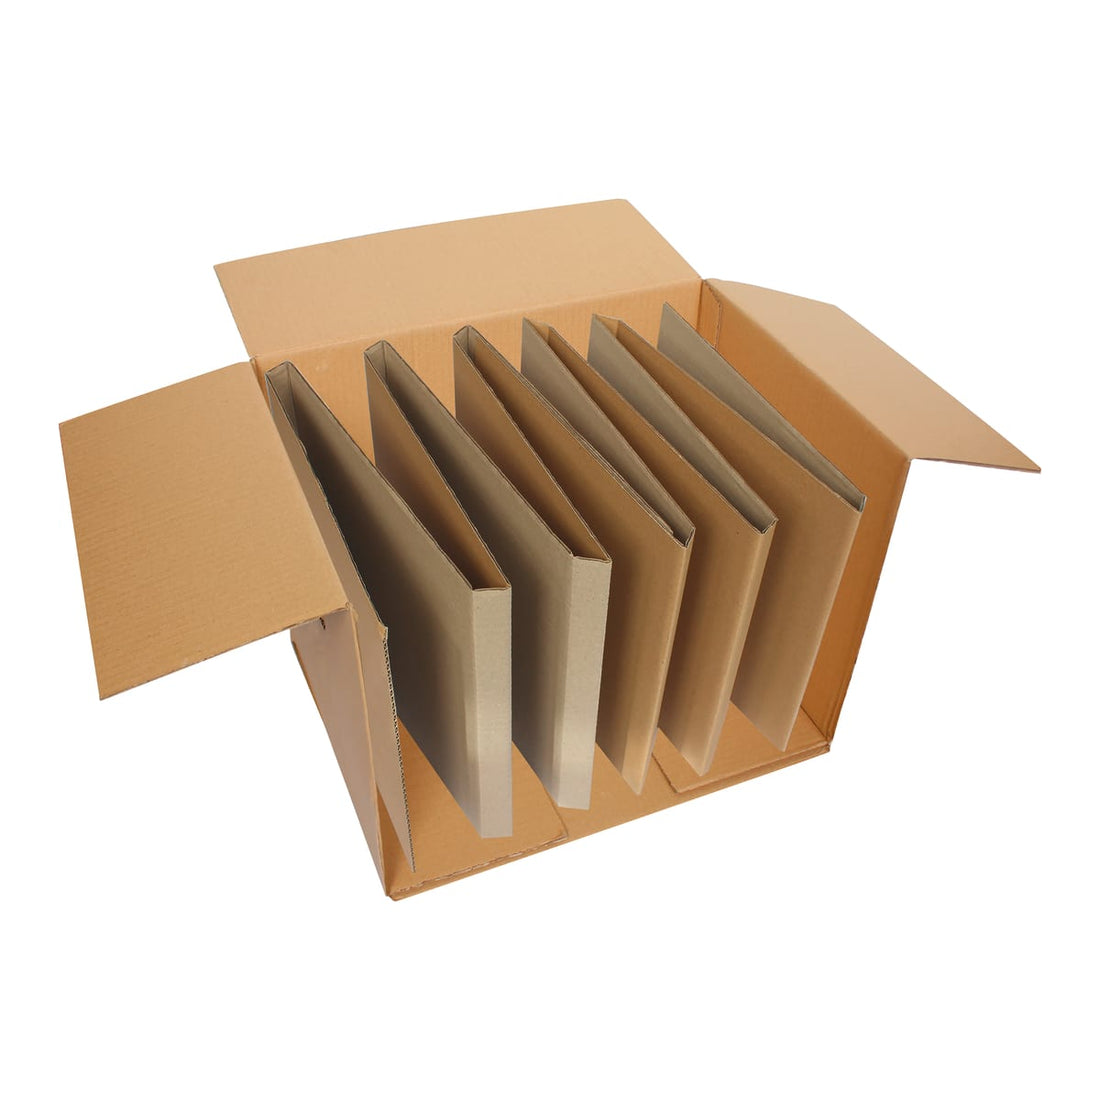 SEPARATORS FOR 12 CARDBOARD DISHES L29xH30xP3CM